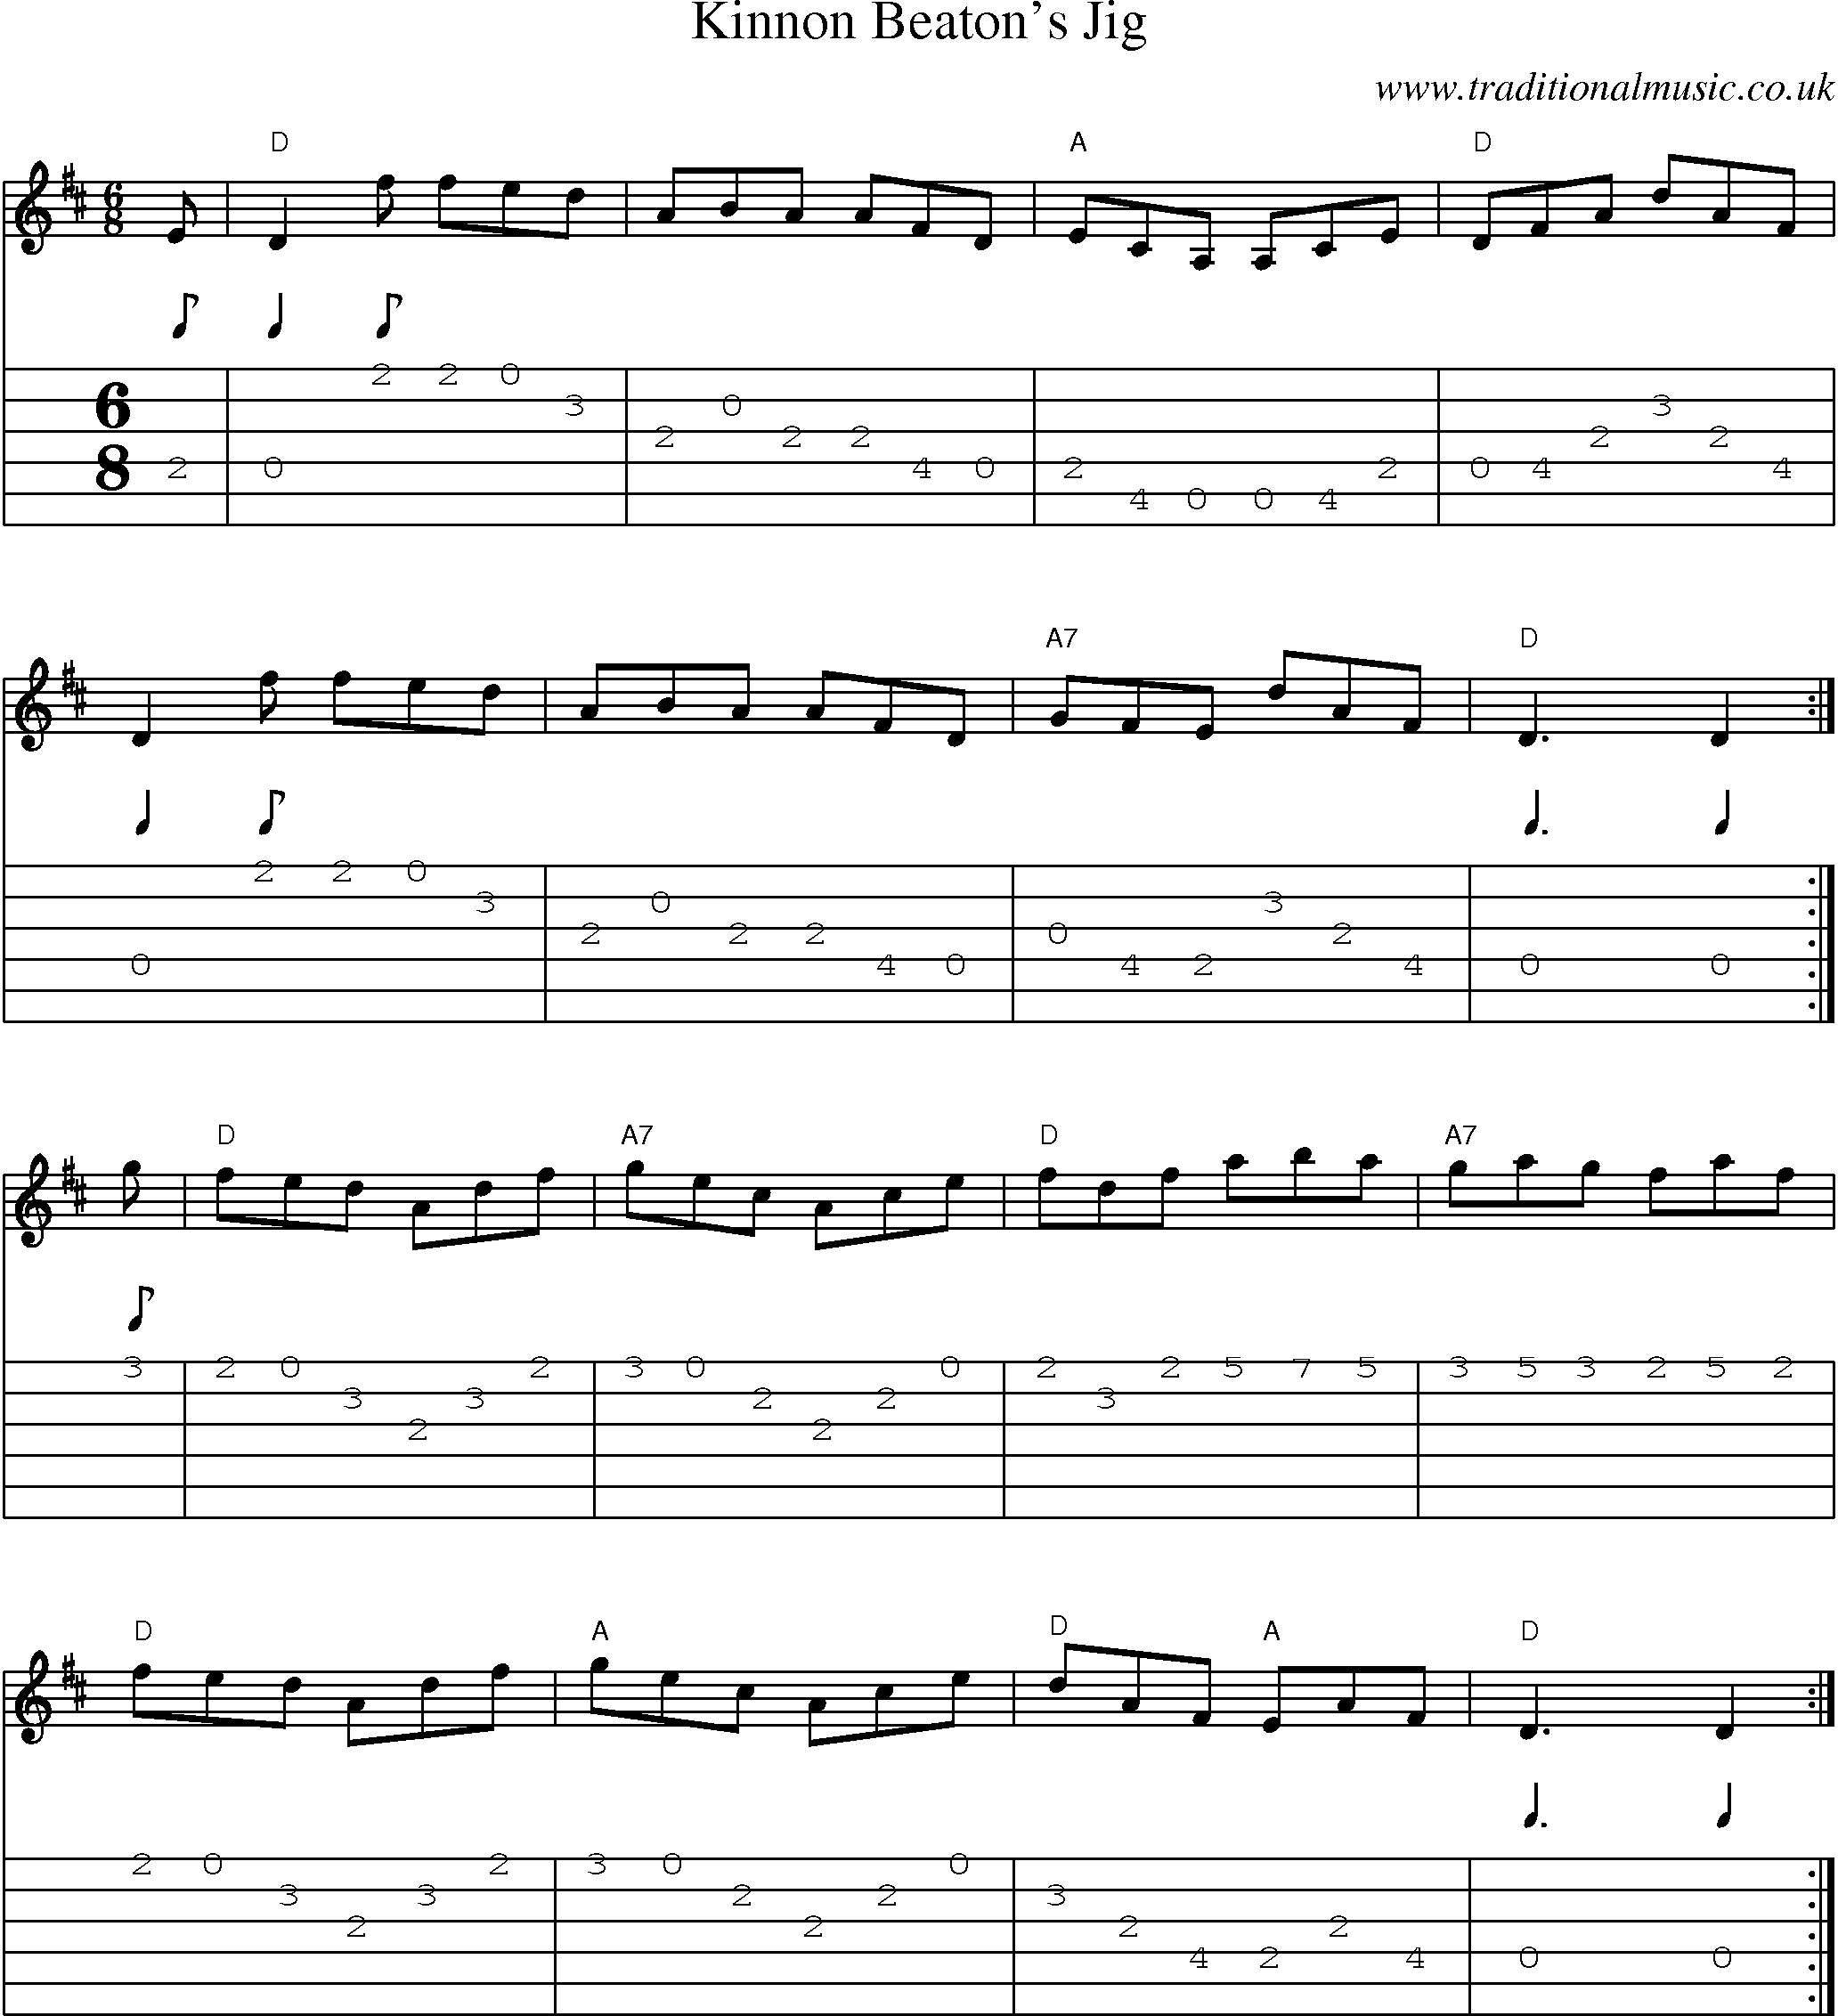 Music Score and Guitar Tabs for Kinnon Beatons Jig